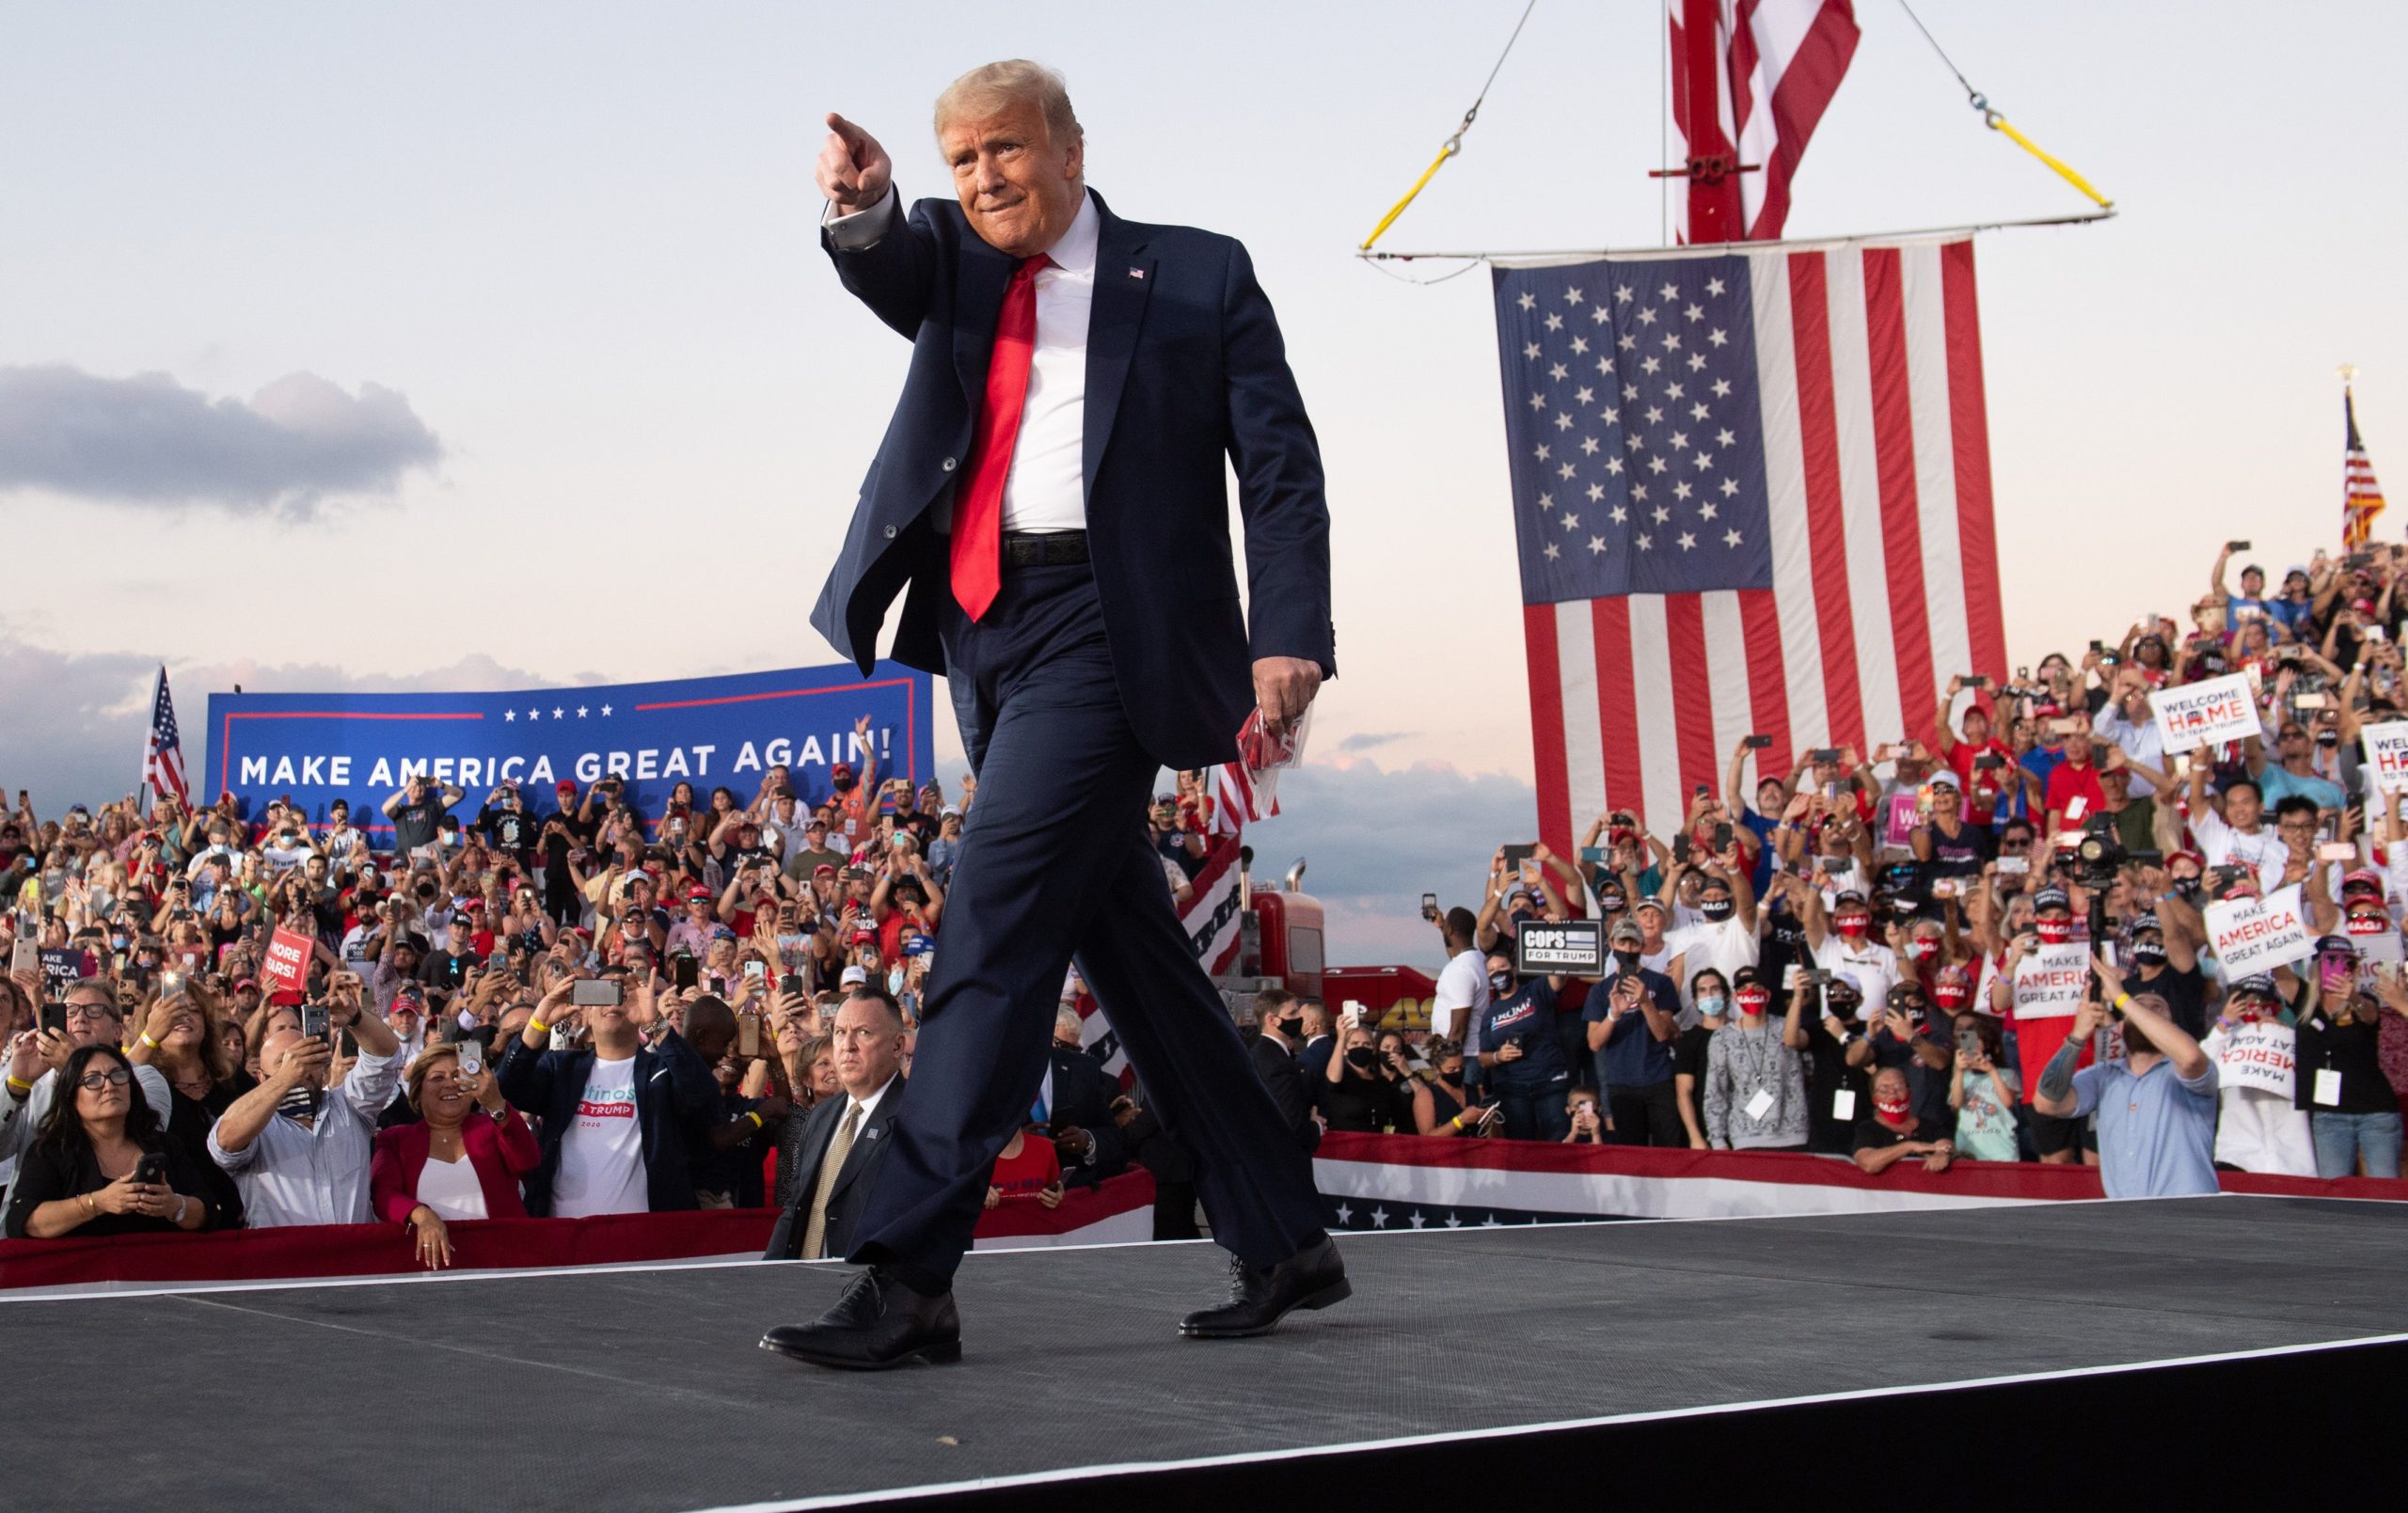 TOPSHOT - US President Donald Trump holds a Make America Great Again rally as he campaigns at Orlando Sanford International Airport in Sanford, Florida, October 12, 2020. (Photo by SAUL LOEB / AFP) (Photo by SAUL LOEB/AFP via Getty Images)